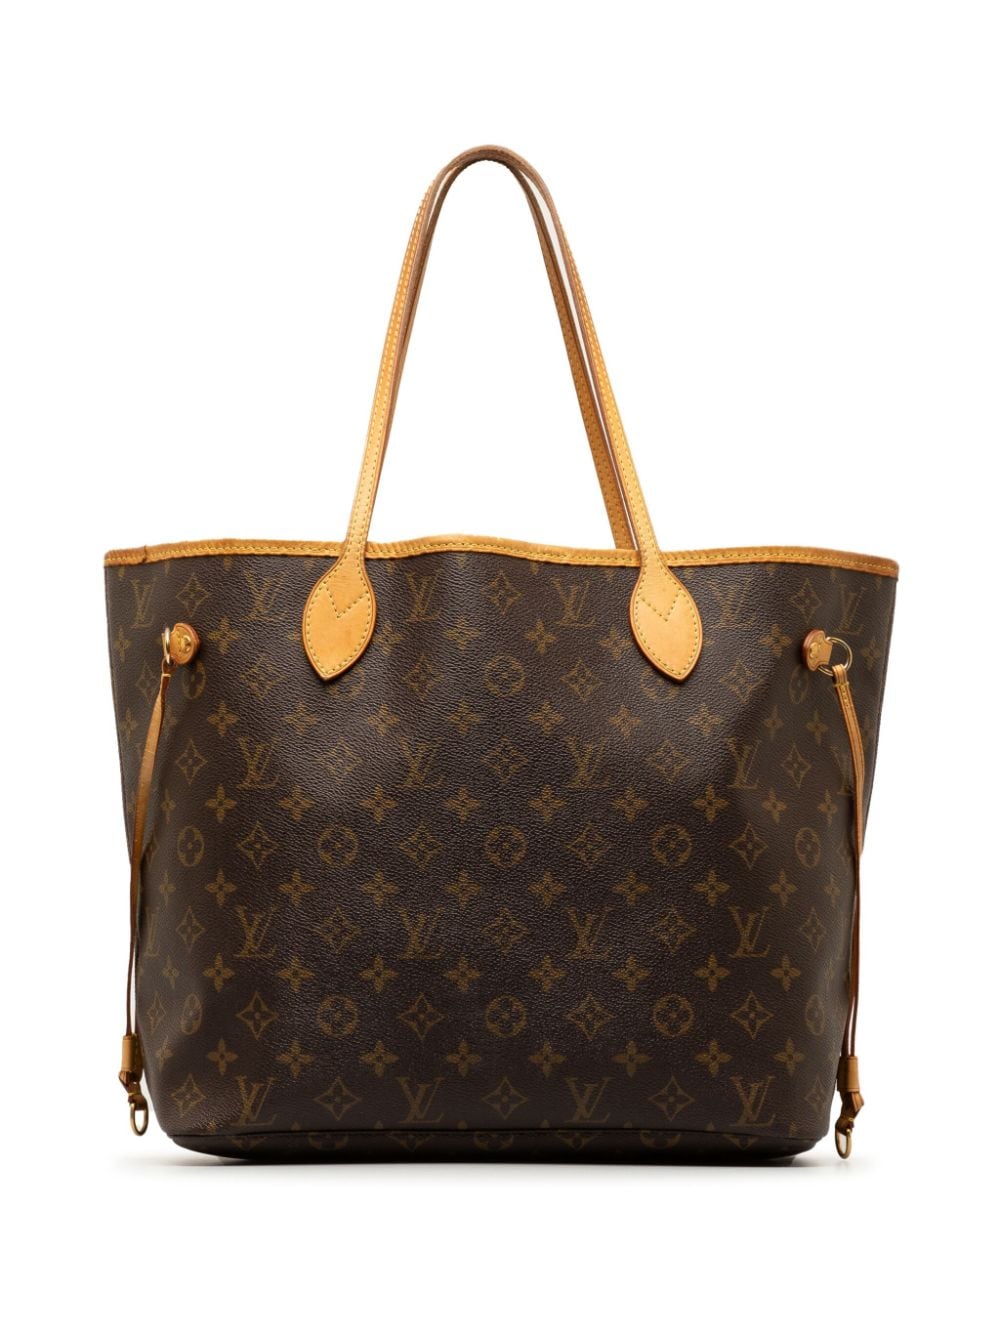 Pre-owned Louis Vuitton 2007 Monogram Neverfull Mm Tote Bag In Brown